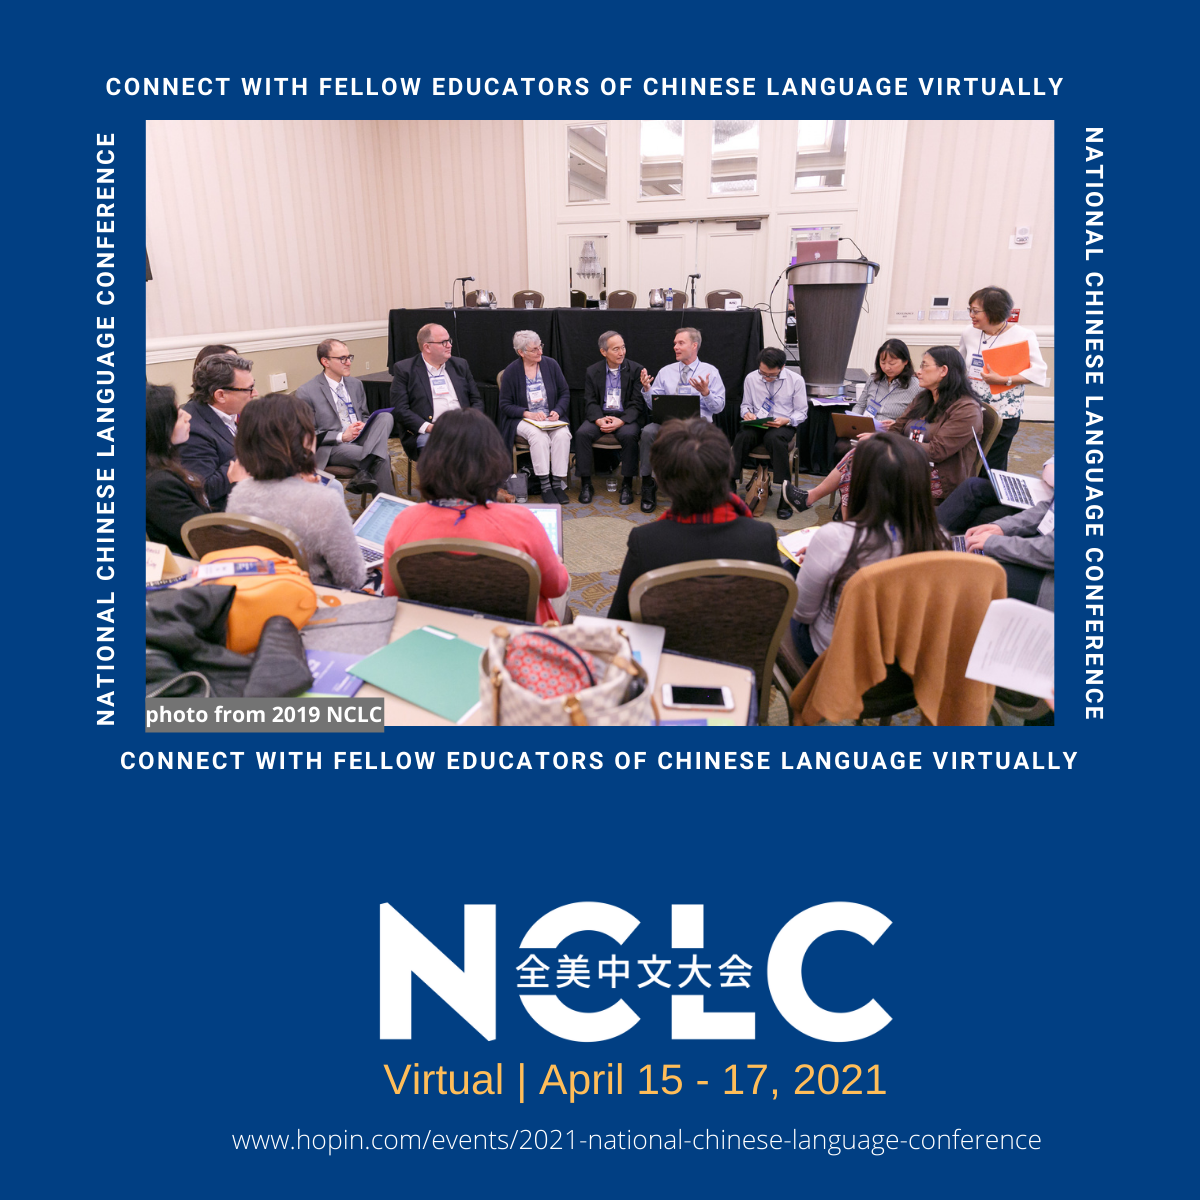 NCLC 2021 Promotion card with URL